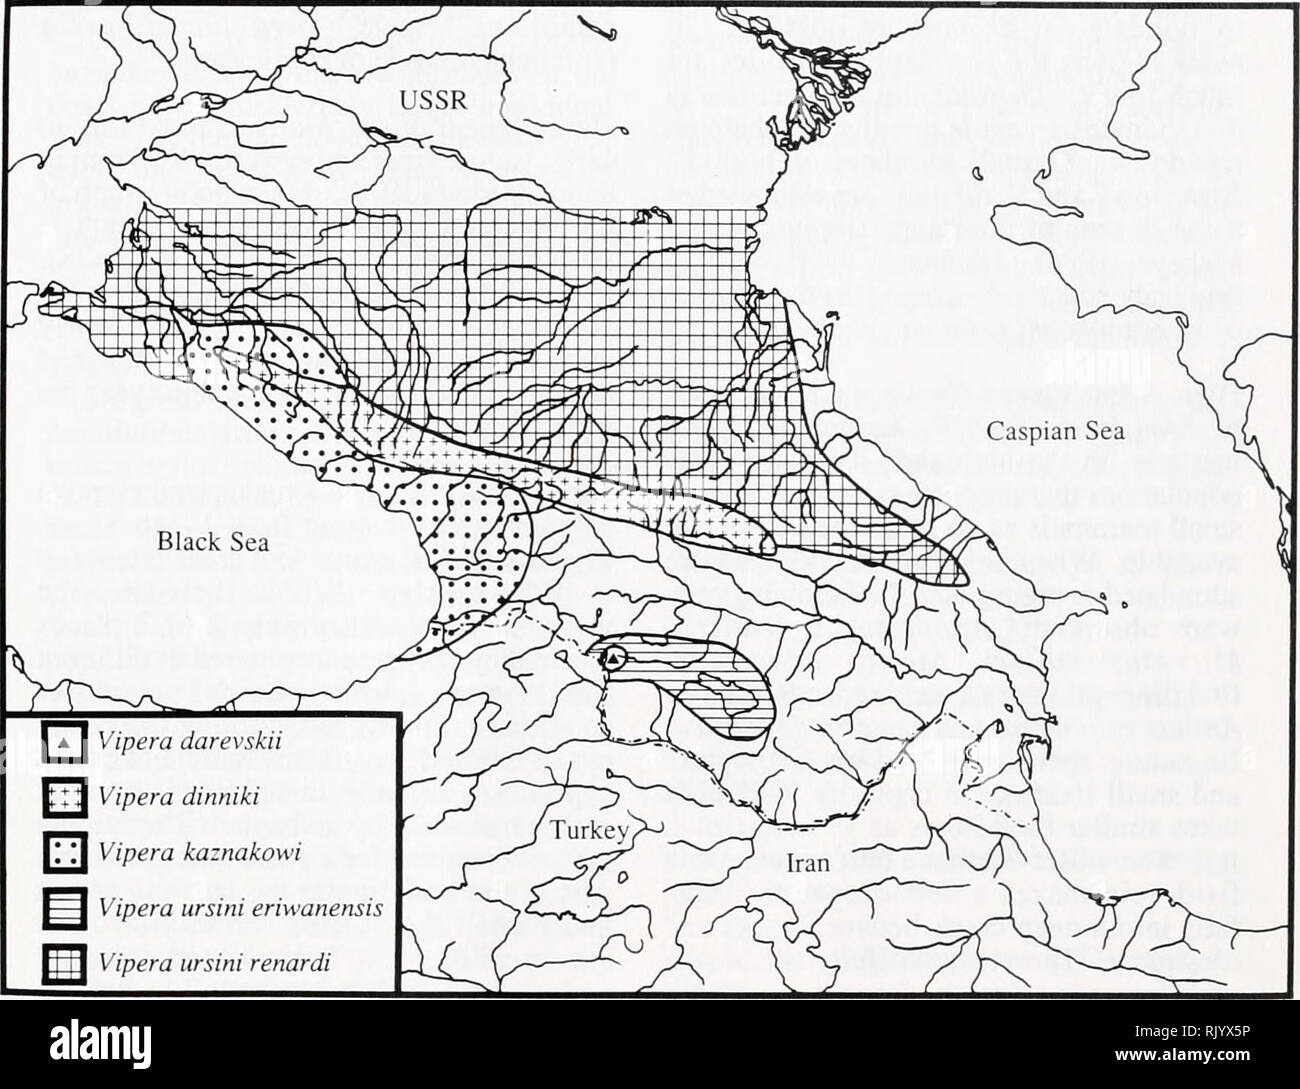 . Asiatic herpetological research. Reptiles -- Asia Periodicals; Amphibians -- Asia Periodicals. April 1990 Asiatic Herpetological Research Vol. 3, p. 19. |*| V 'ipera darevskii J Vipera dinnik 1 Vipera kaznakowi | Vipera ursini eriwanensis J Vipera ursini renardi FIG. 9. Distribution map of shield-headed vipers in the Caucasus. forests and Abies forests to pine forests, and further east, to steppe areas (Adamyants 1971, Kharadze 1974, Lavrenko 1980; Agakhanyants 1981). This change is noted in amphibians and reptiles. Along with V. dinniki, Lacerta derjugini and Pelodytes caucasicus fall out a Stock Photo